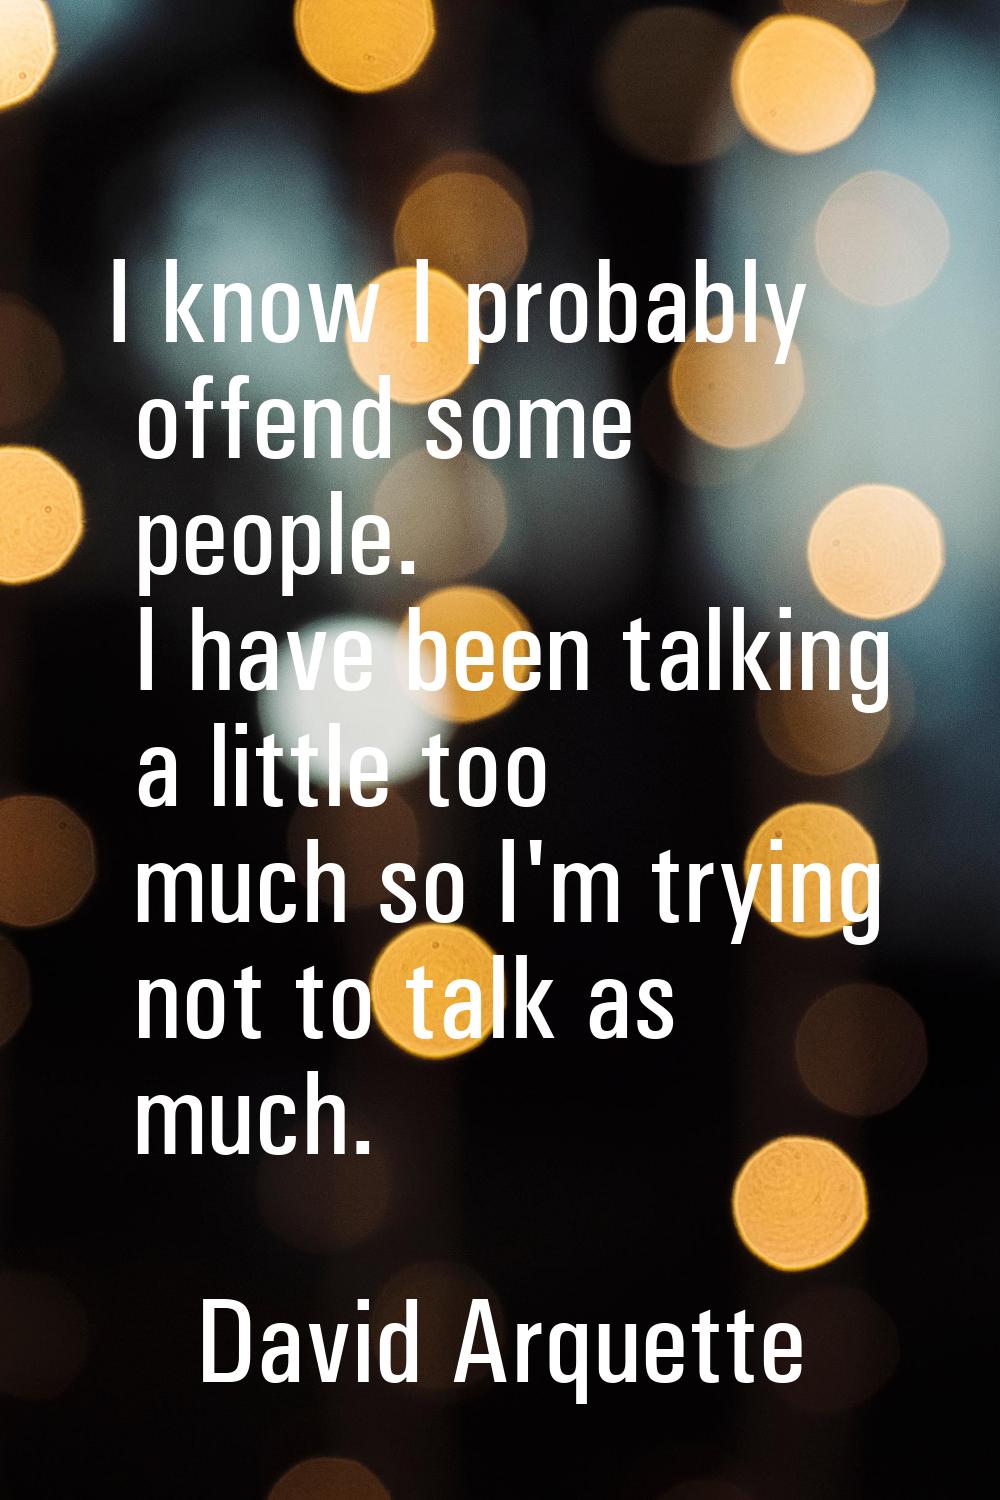 I know I probably offend some people. I have been talking a little too much so I'm trying not to ta